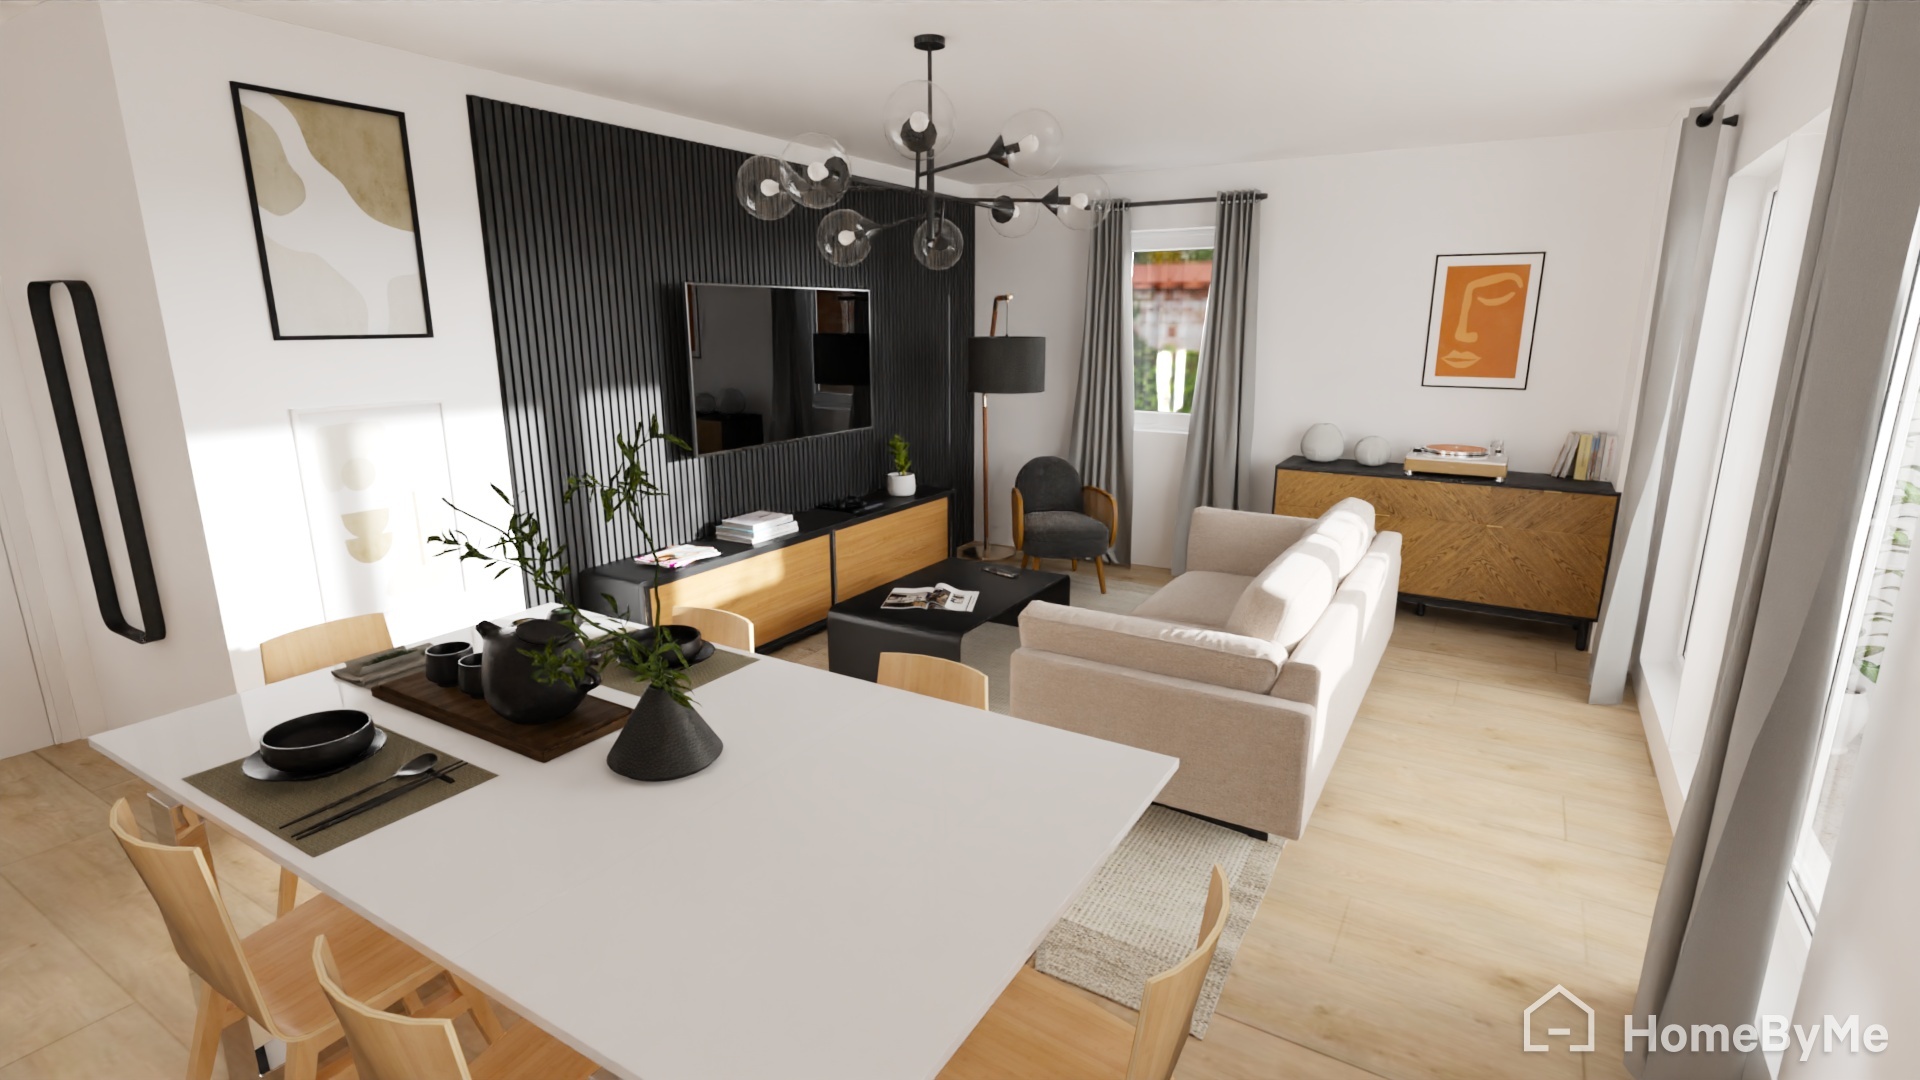 Figaro 3D immo - Full Homebyme - Ambiance moderne